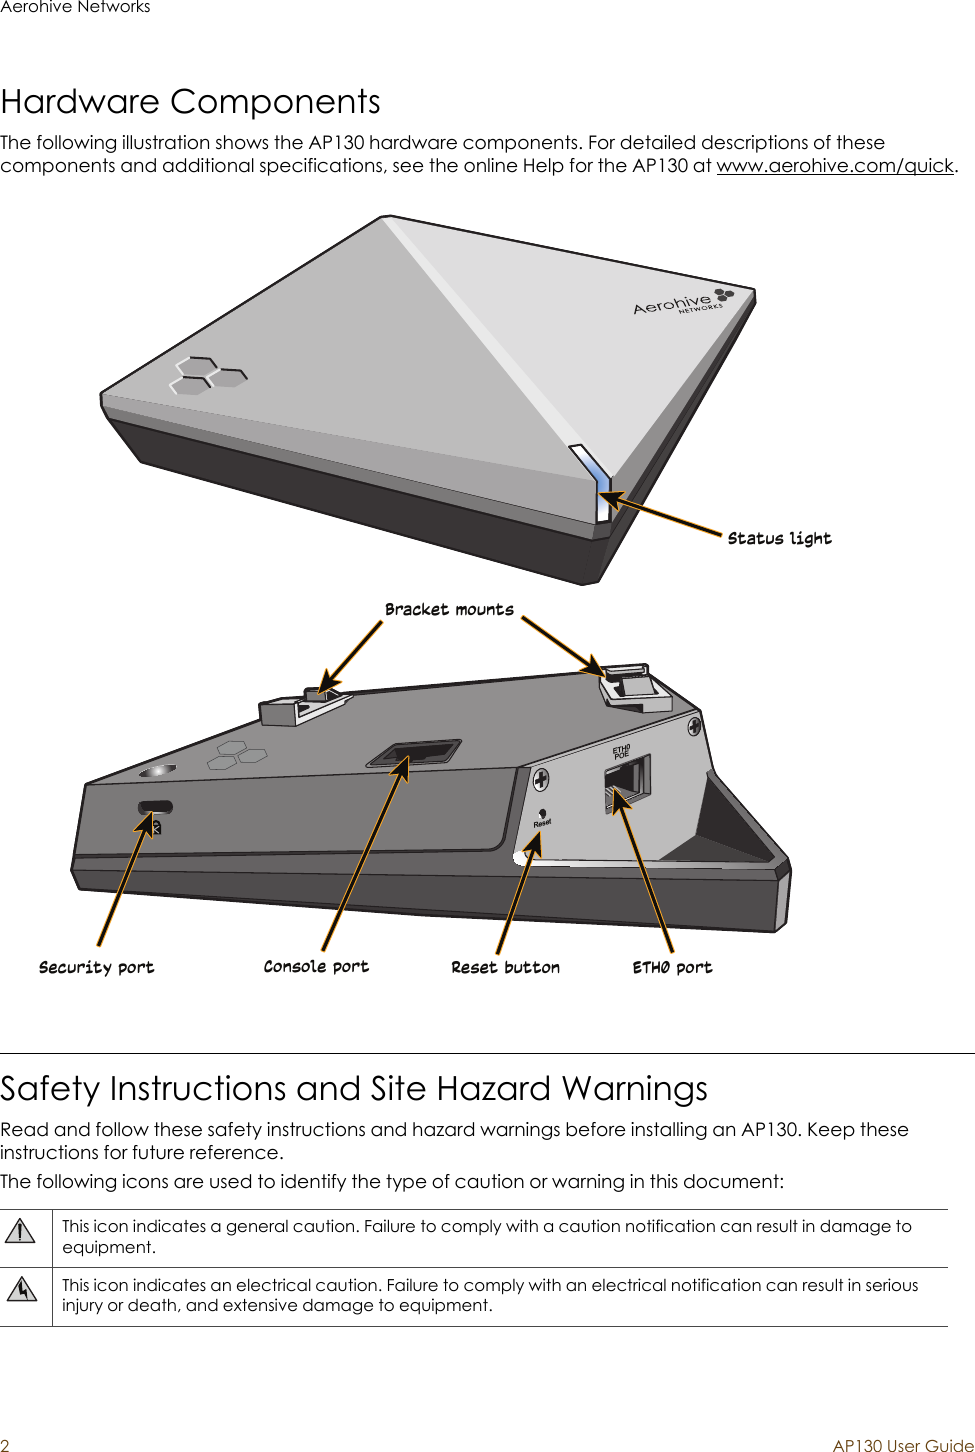 Aerohive Networks2AP130 User GuideHardware ComponentsThe following illustration shows the AP130 hardware components. For detailed descriptions of these components and additional specifications, see the online Help for the AP130 at www.aerohive.com/quick.Safety Instructions and Site Hazard WarningsRead and follow these safety instructions and hazard warnings before installing an AP130. Keep these instructions for future reference.The following icons are used to identify the type of caution or warning in this document:This icon indicates a general caution. Failure to comply with a caution notification can result in damage to equipment.This icon indicates an electrical caution. Failure to comply with an electrical notification can result in serious injury or death, and extensive damage to equipment.ResetETH0POESecurity port Console port Reset buttonStatus lightETH0 portBracket mounts